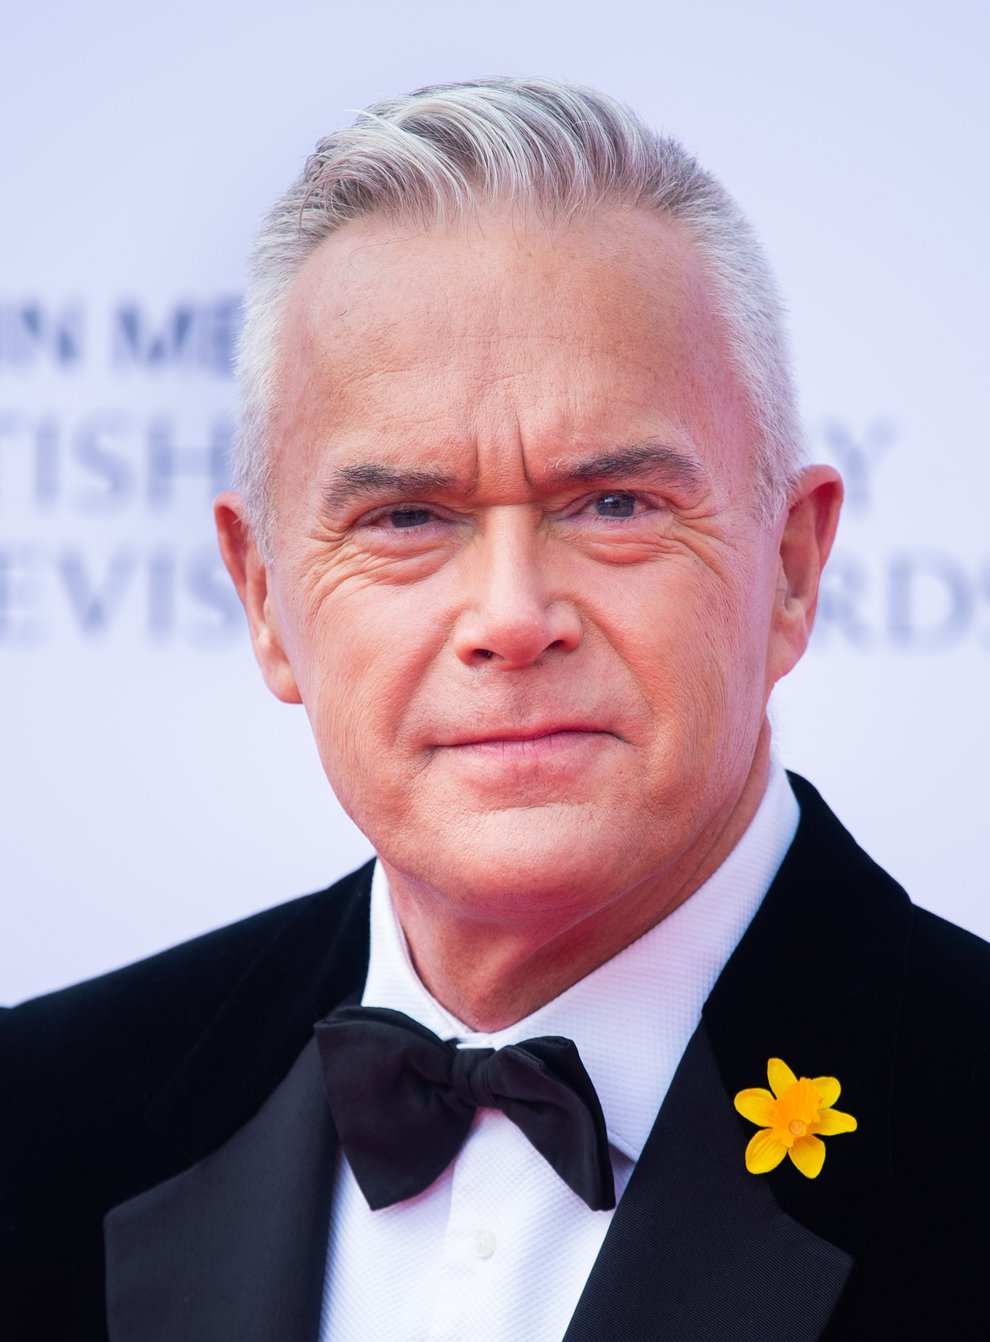 Huw Edwards revealed he has depression in a documentary last year (Matt Crossick/PA)